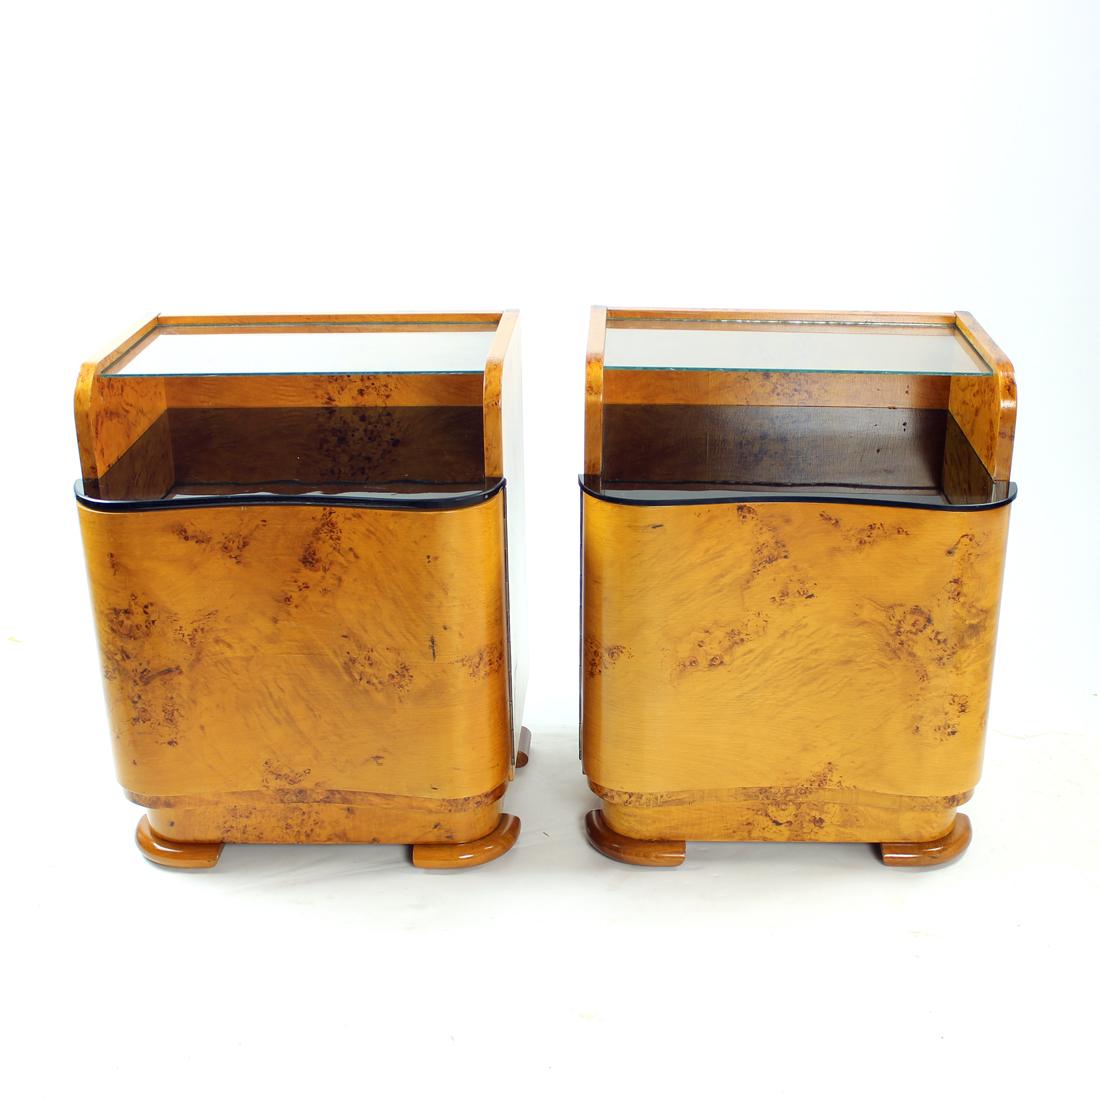 Unique set of two bedside tables from art deco era. Produced in Czechoslovakia in 1940s. The tables are made of oak wood with walnut veneer finish. Each table has a compartment with doors and one glass shelf in clear glass. There is also a black